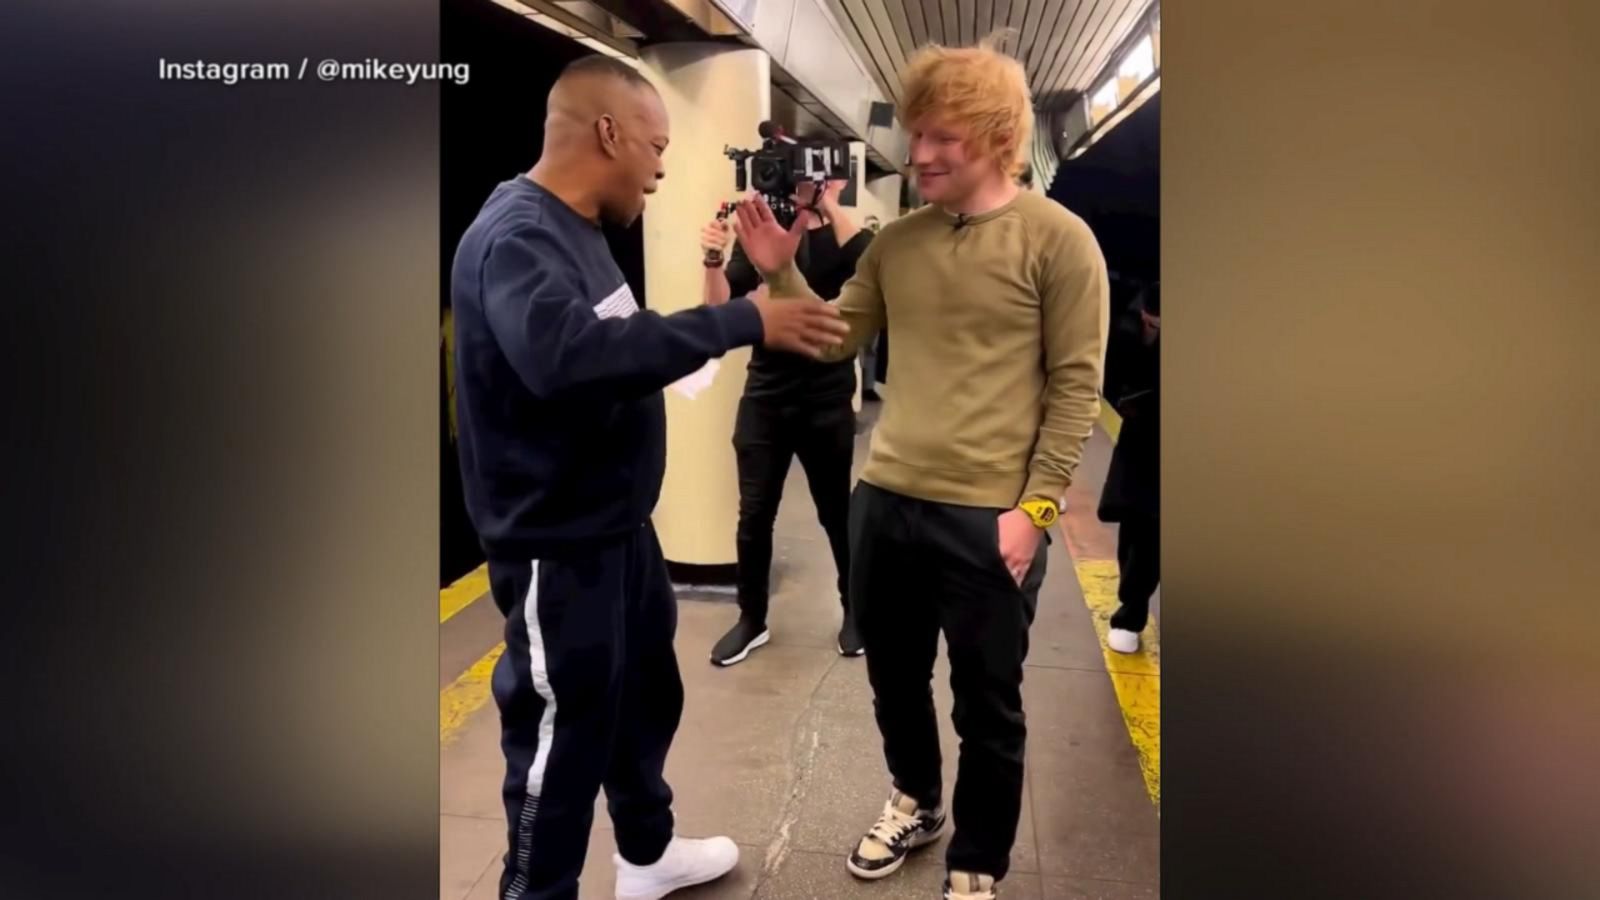 Ed Sheeran Celebrates Trial Win With Surprise NY Performance - Watch